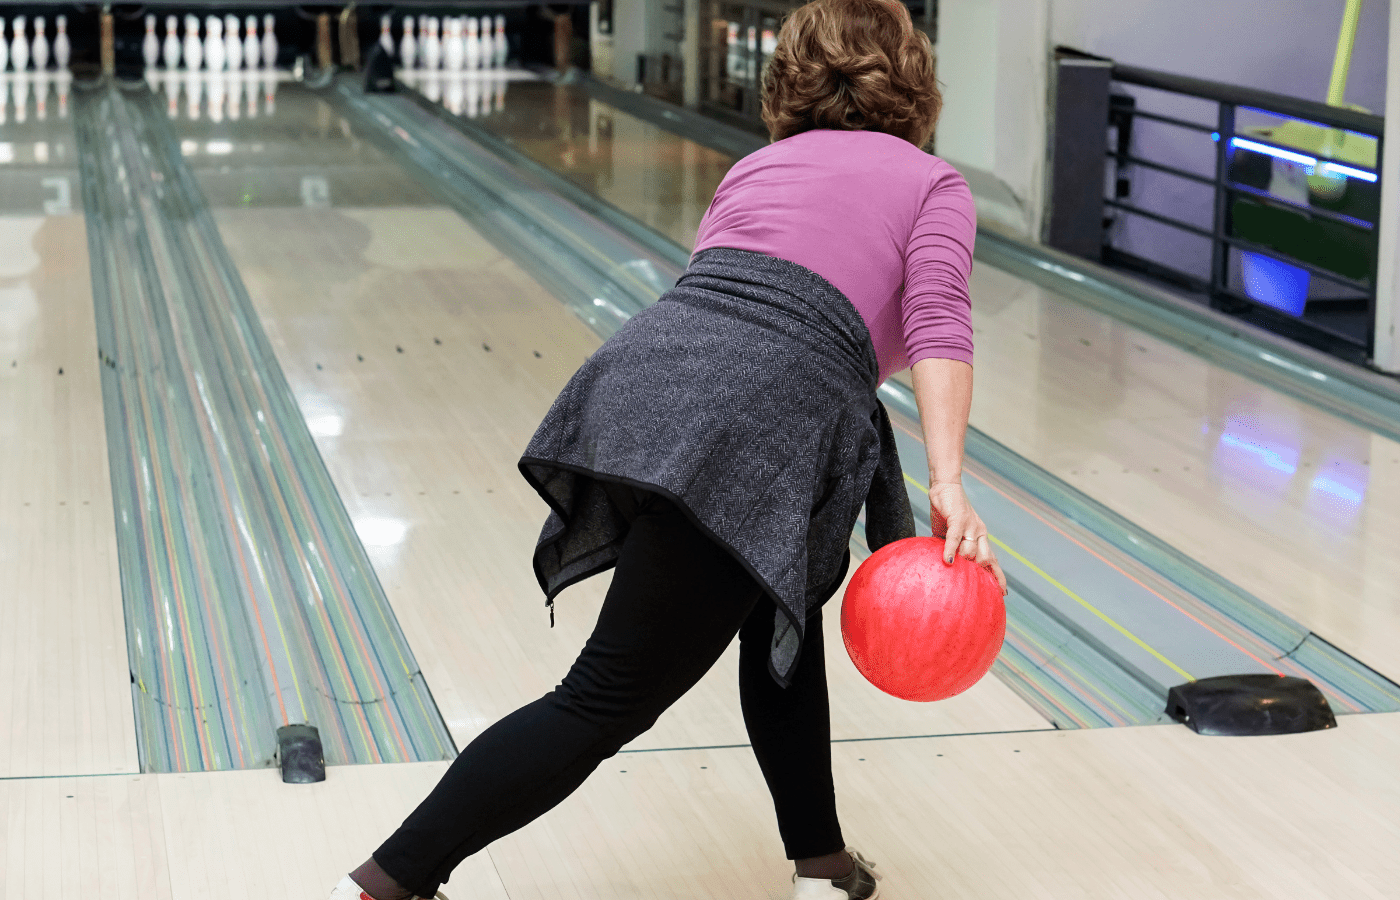 Does Bowling Count as Exercise